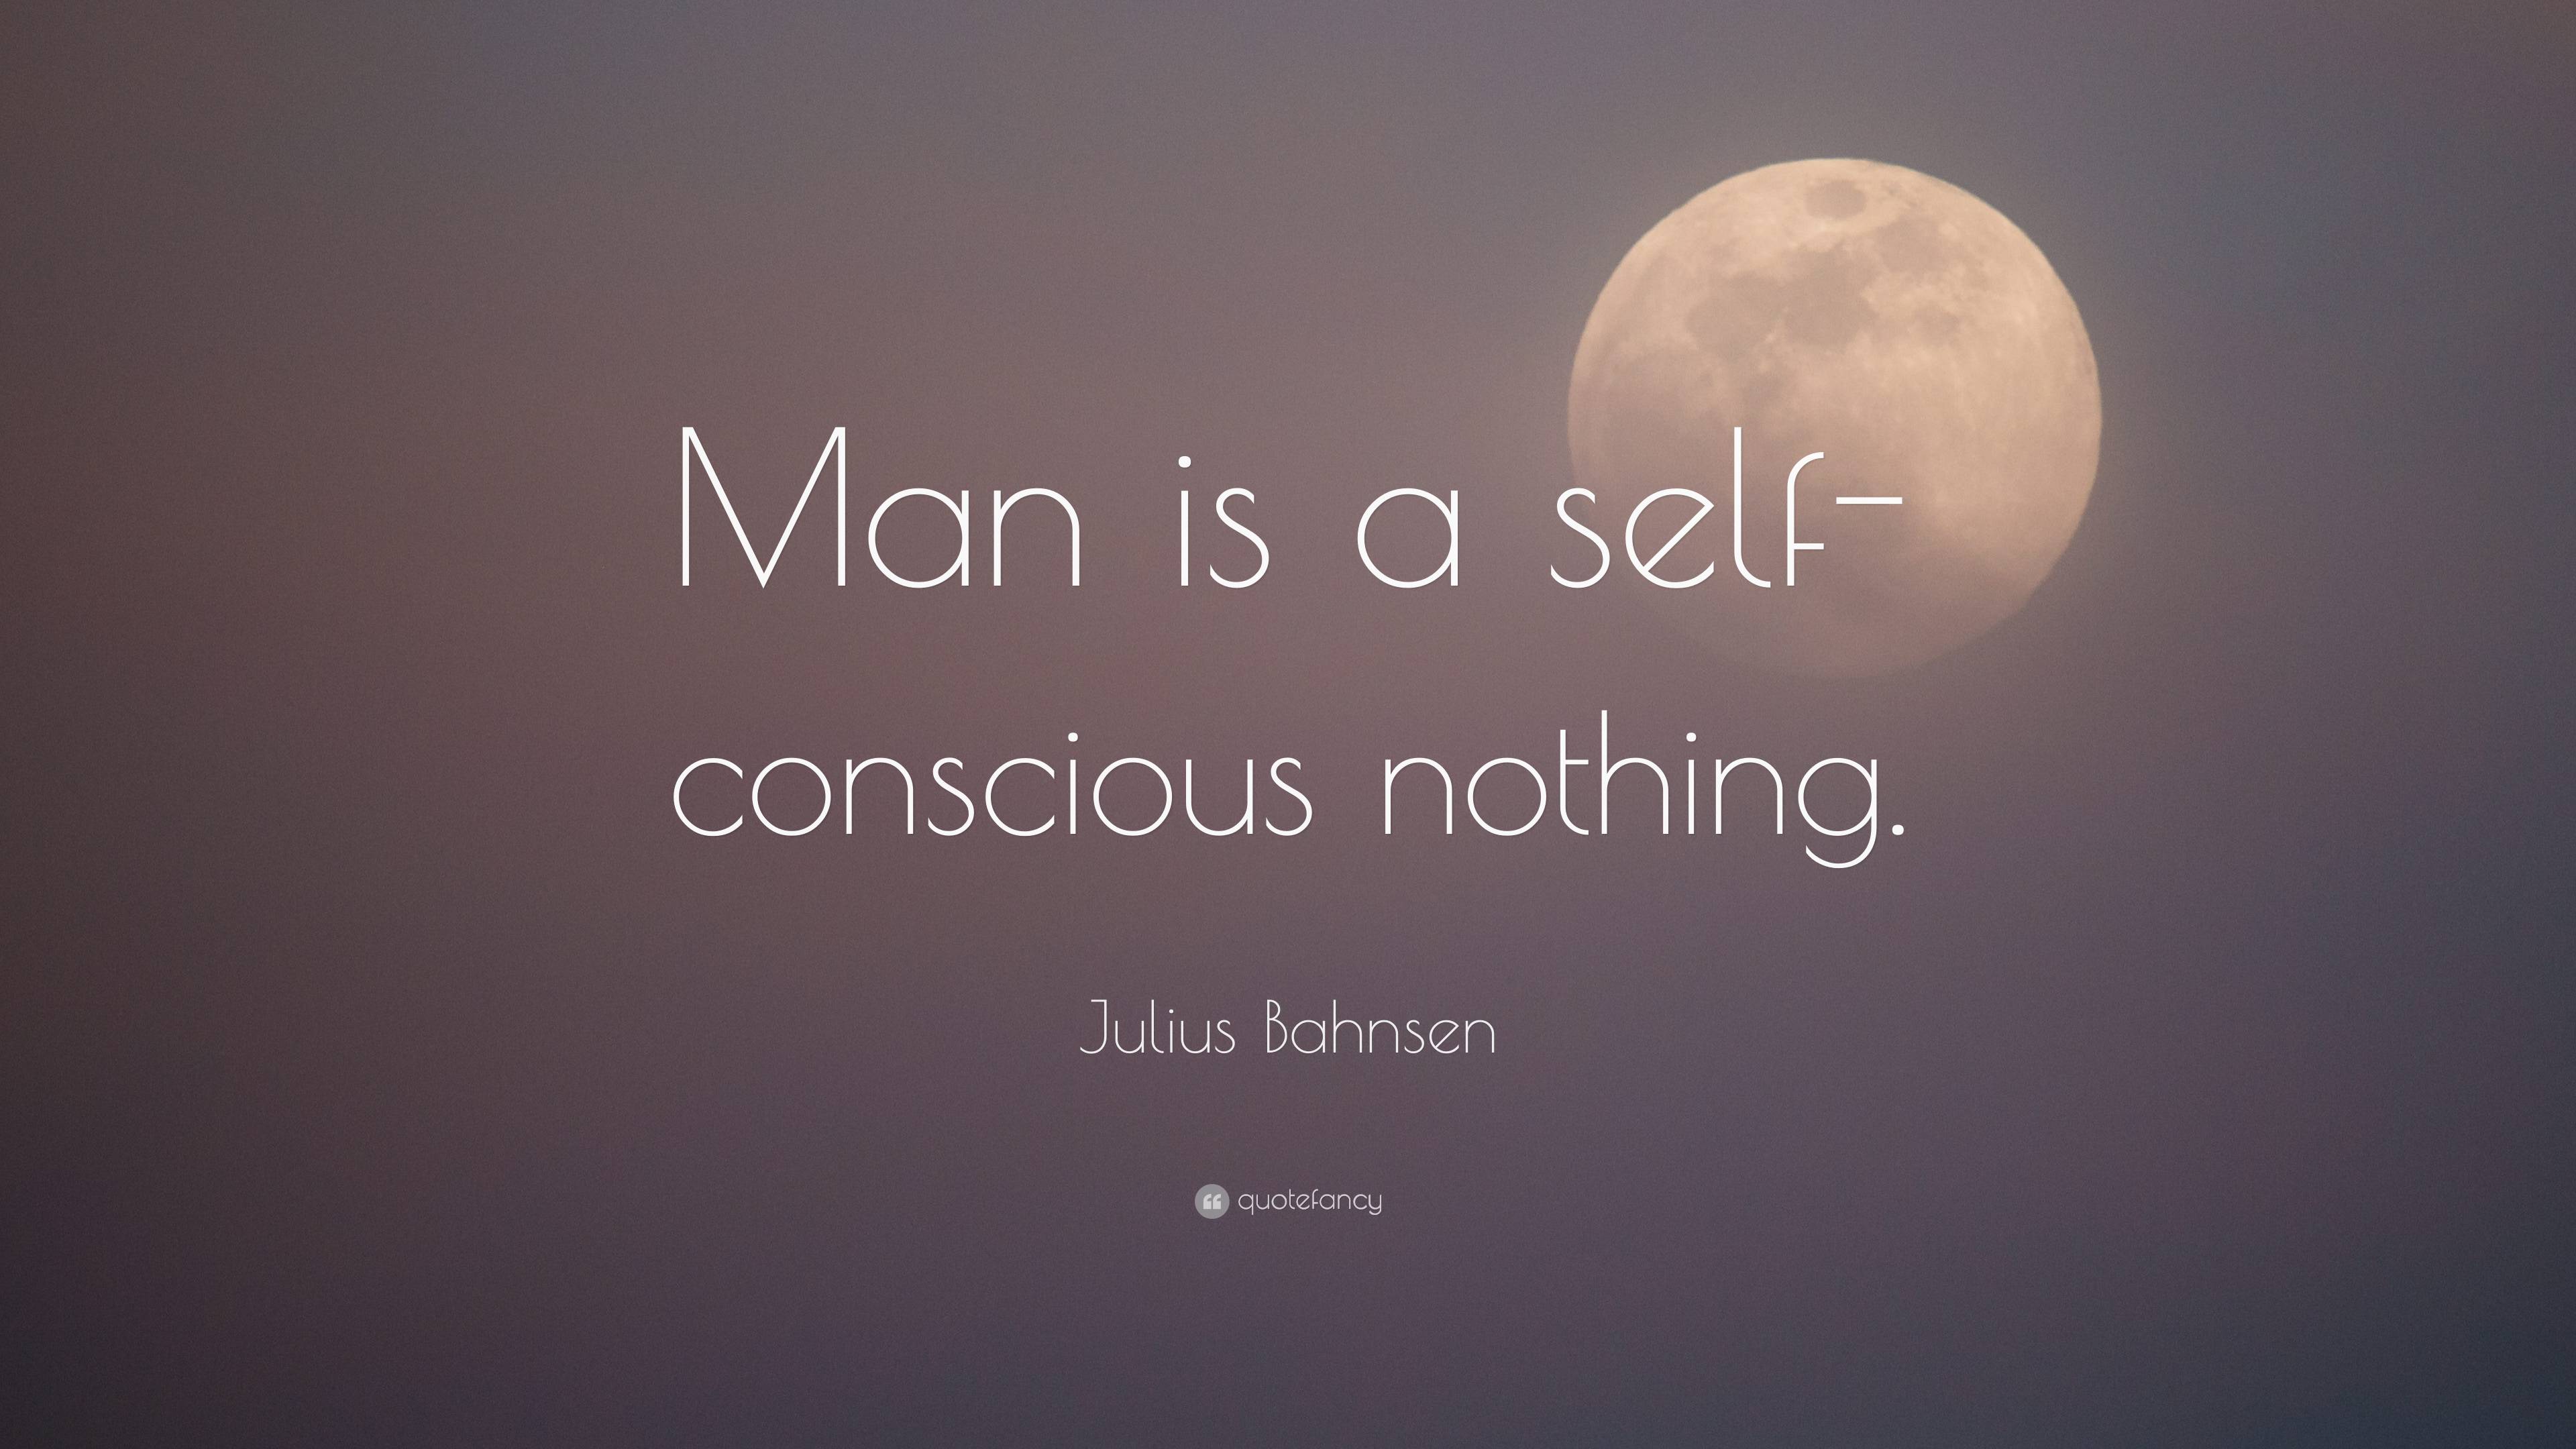 Julius Bahnsen Quote: “Man is a self-conscious nothing.”